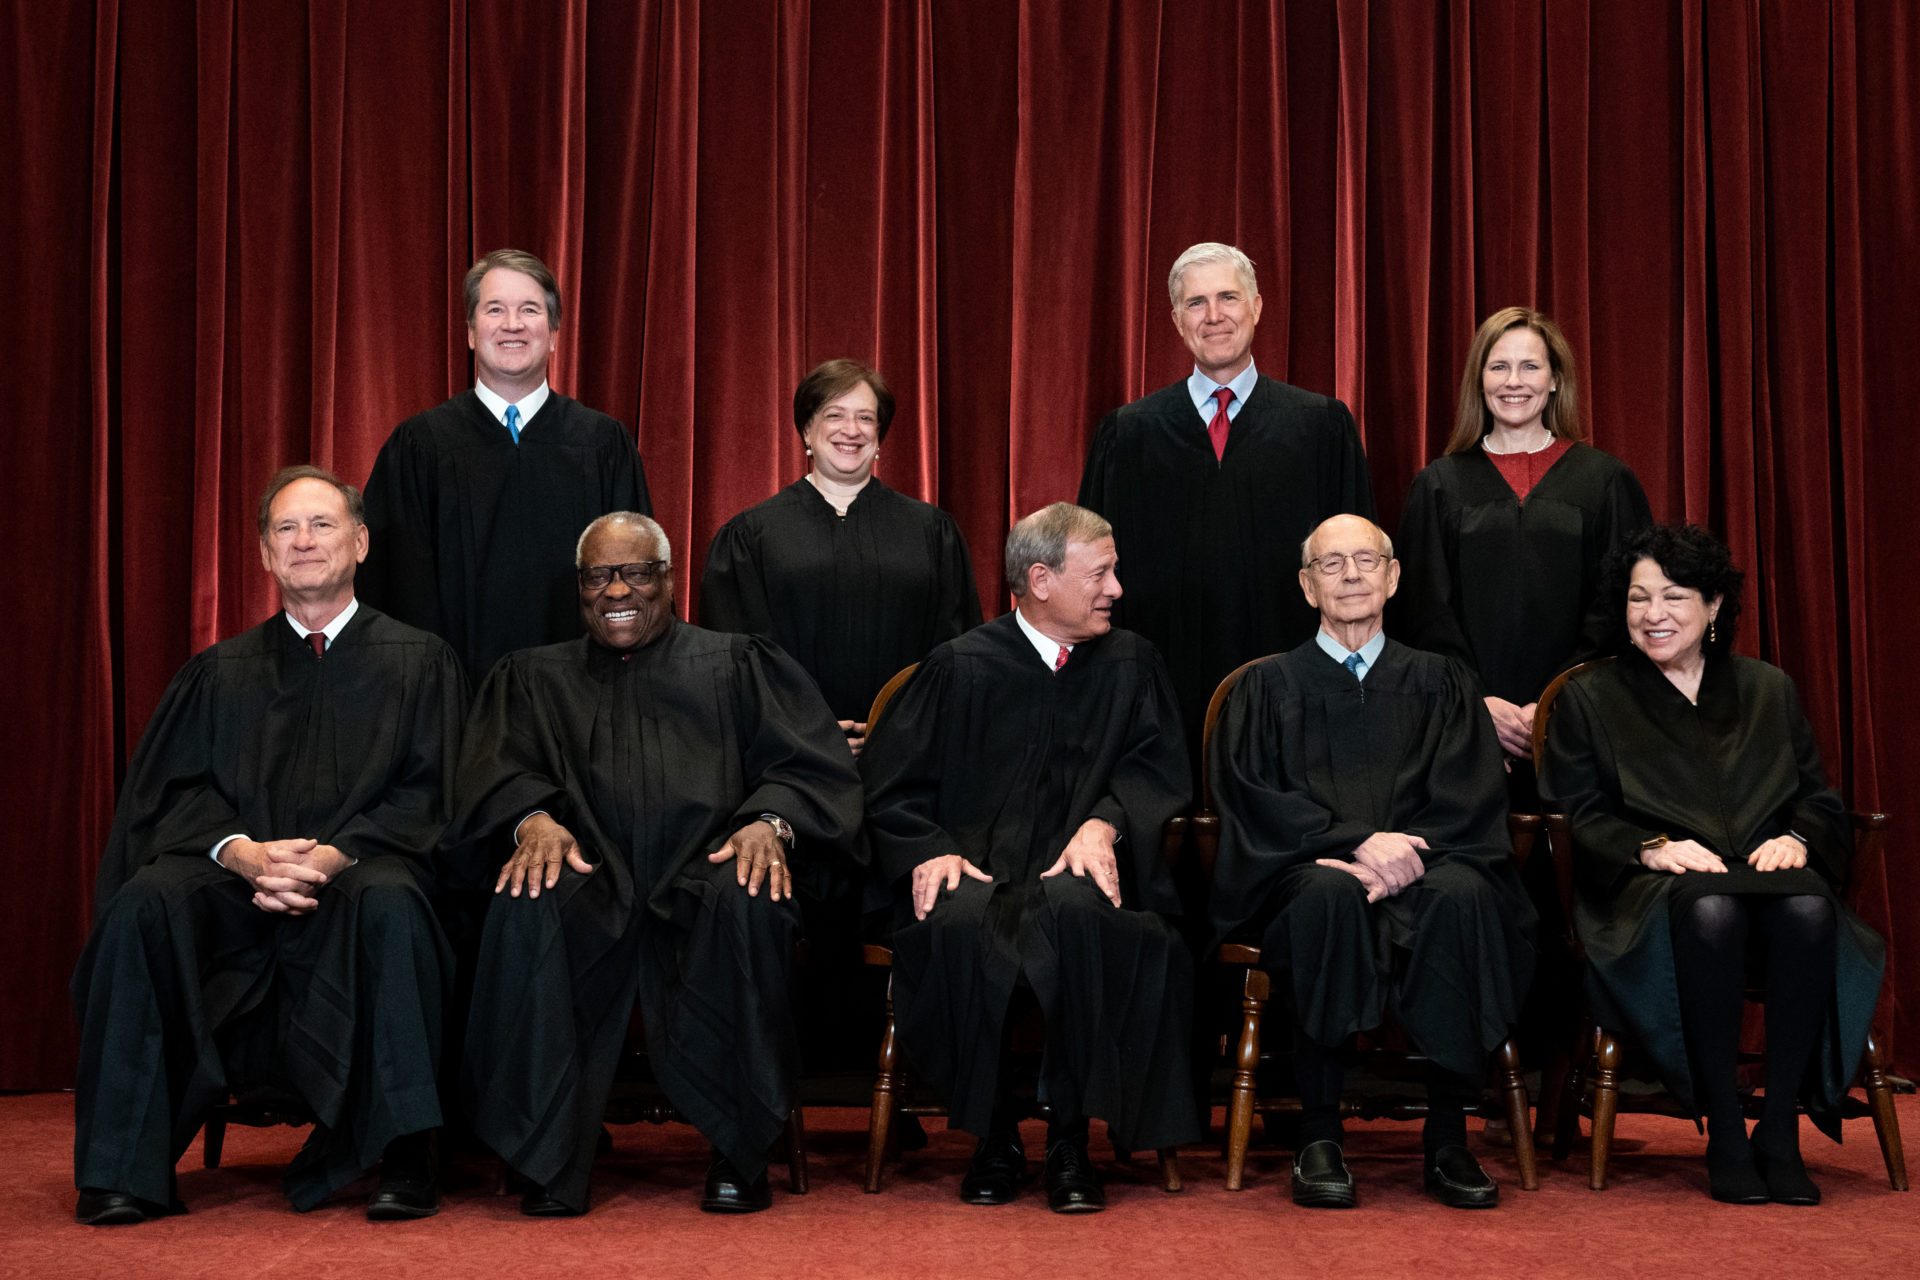 The Current Us Supreme Court Justices Average Age Might Surprise You